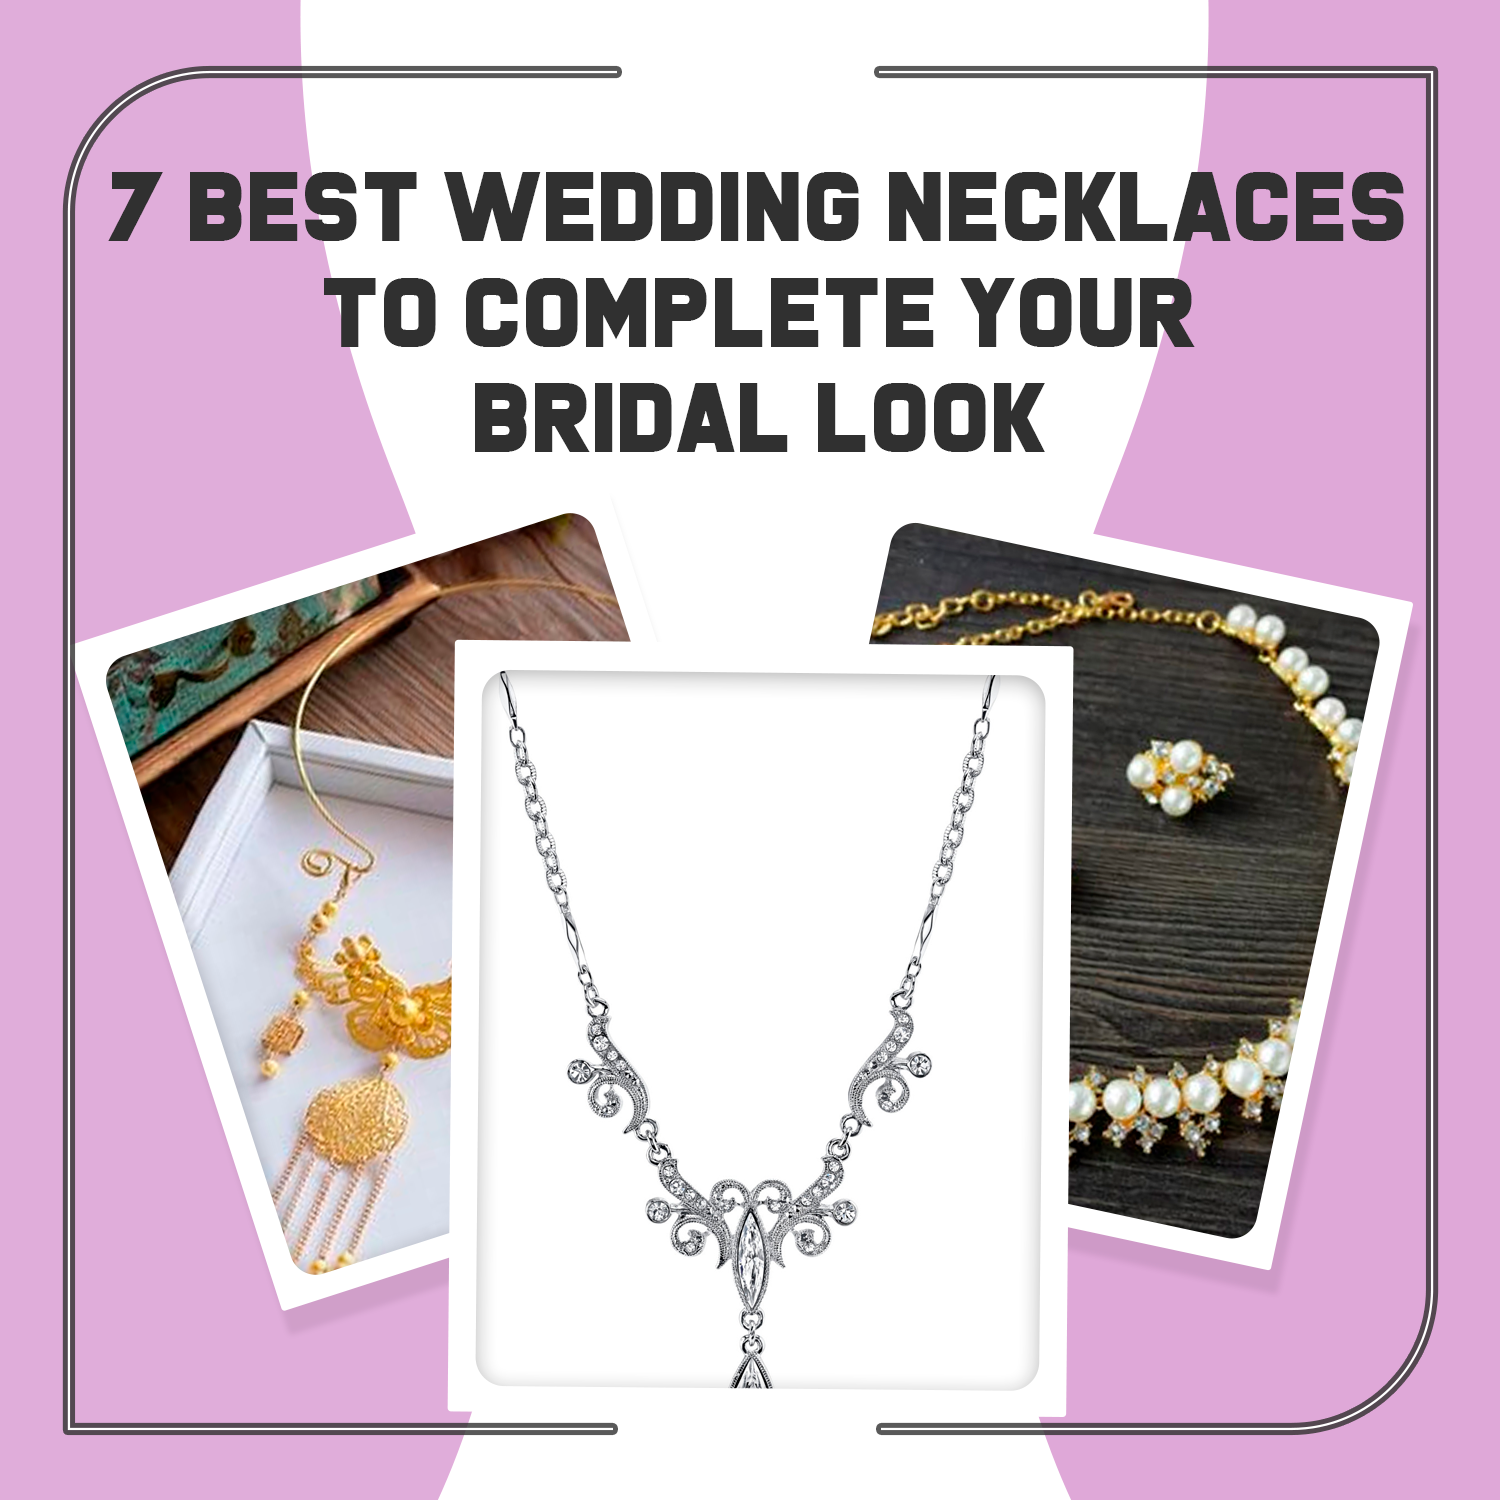 7 Best Wedding Necklaces to Complete Your Bridal Look